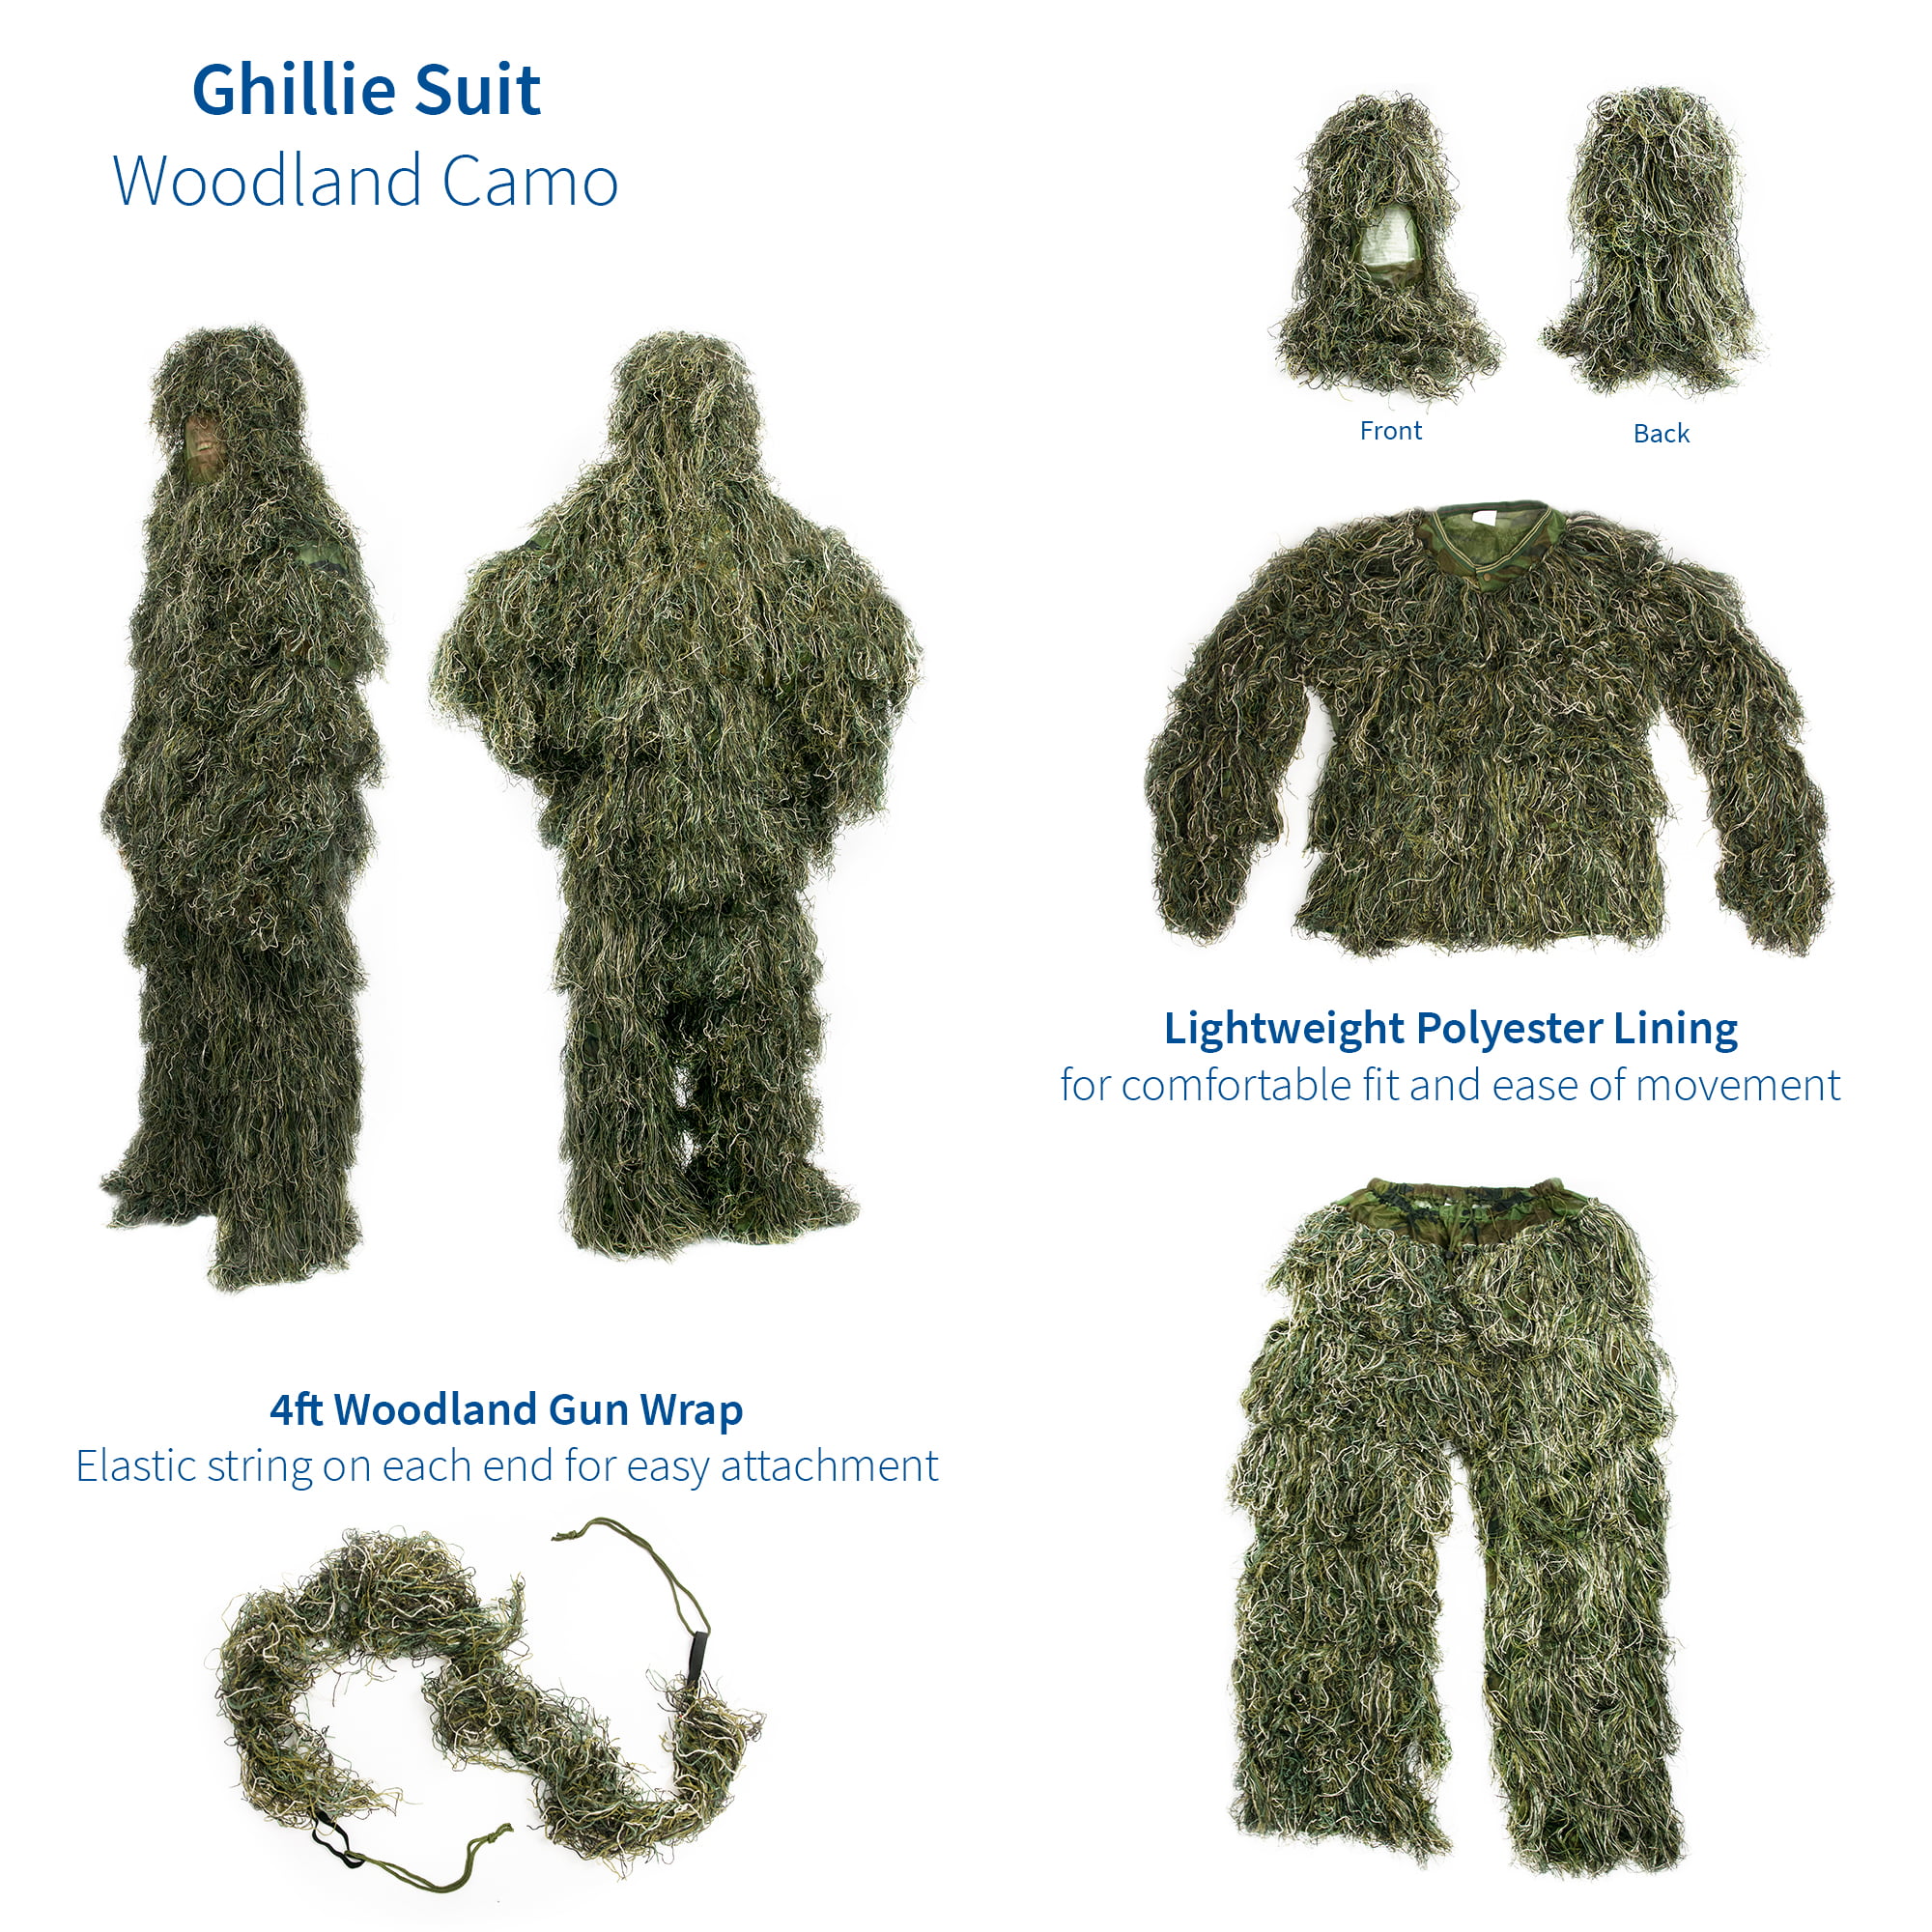 XLarge or XXLarge 3D 5 in 1 5 in 1 Ghillie Suit Forest Green Woodland 